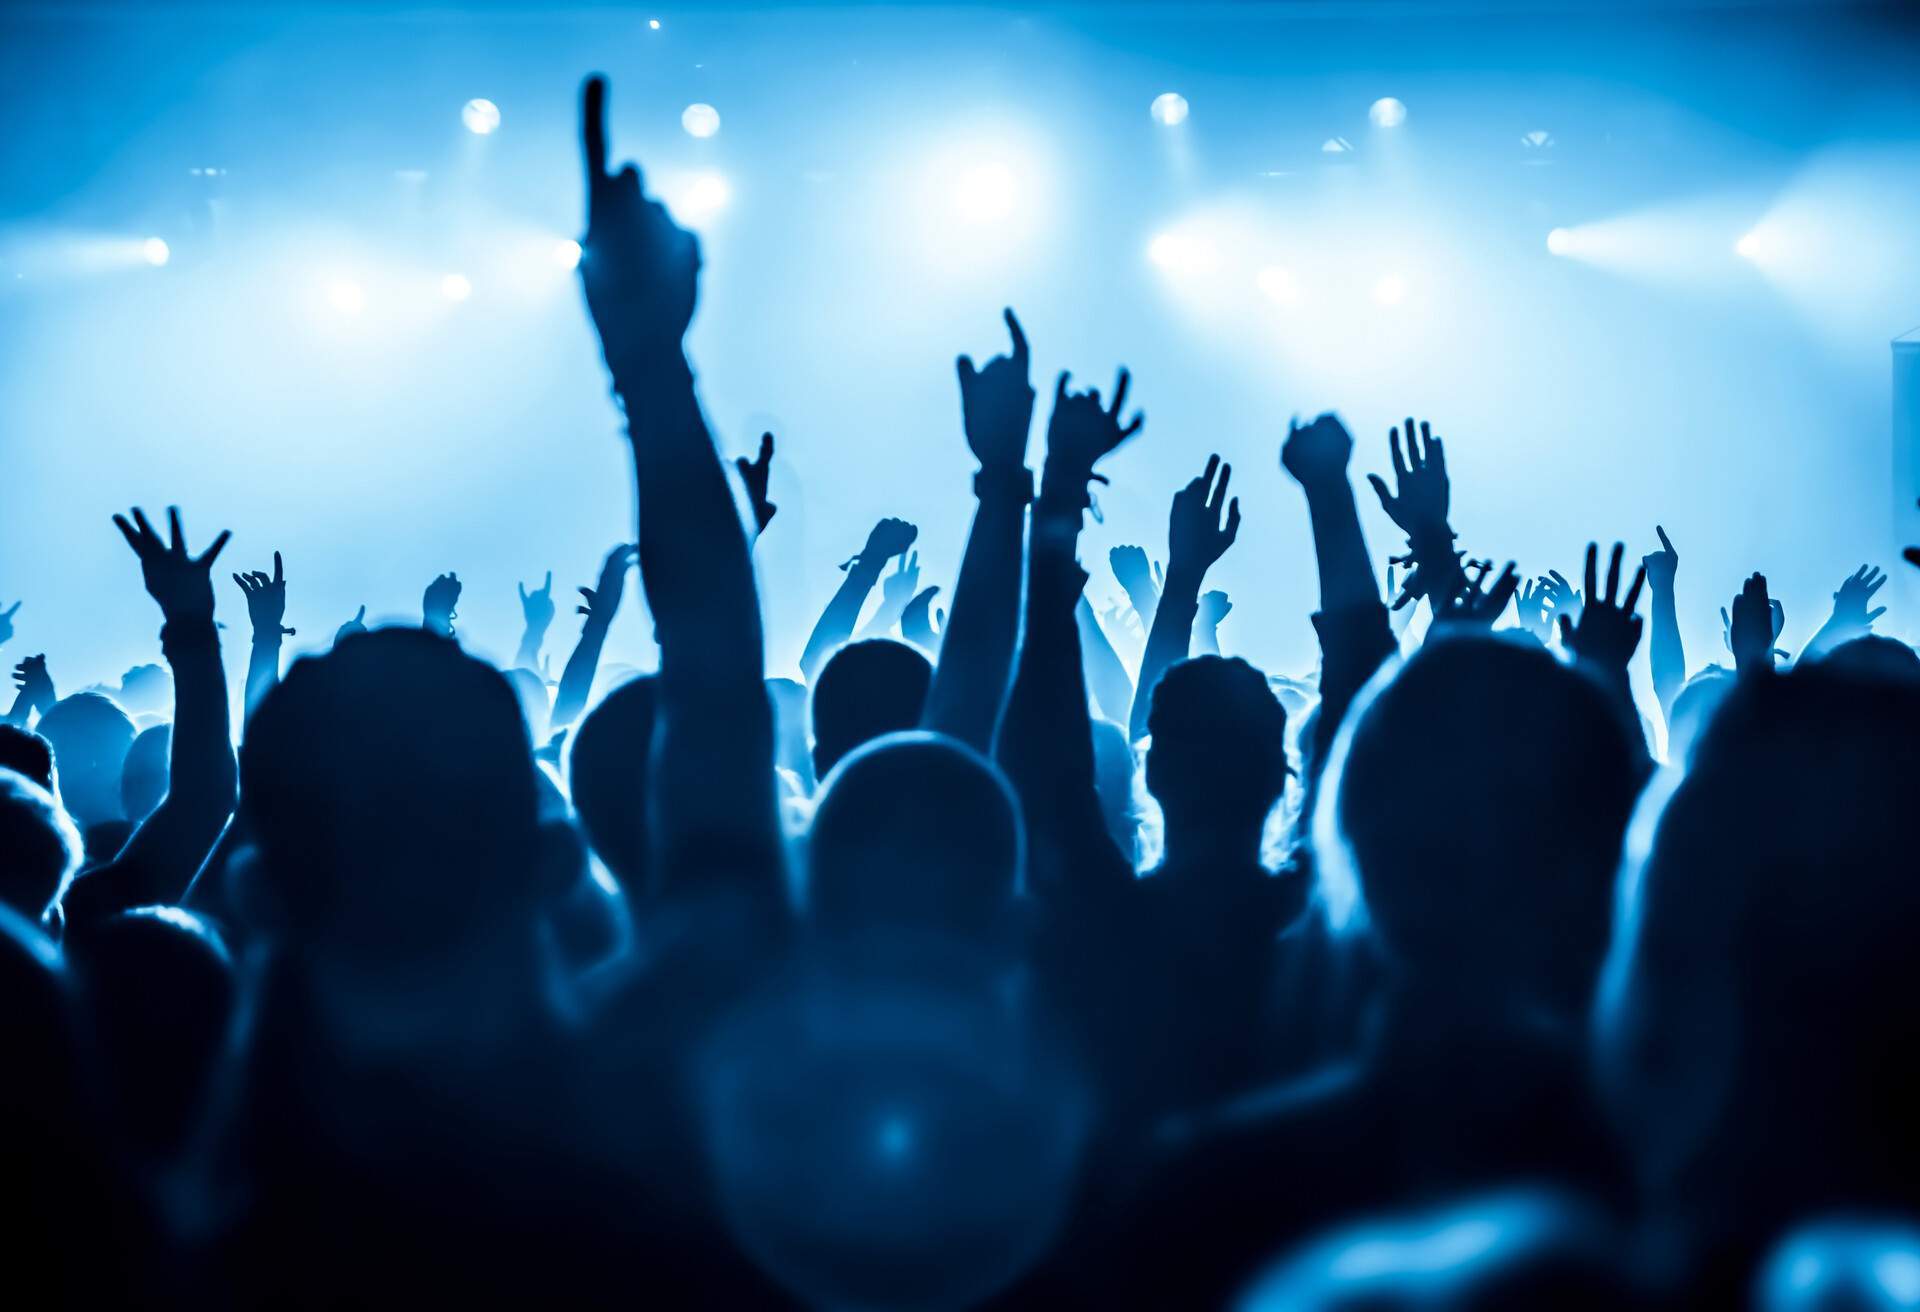 Silhouette of people raising their hands in the air against the glaring stage lights.